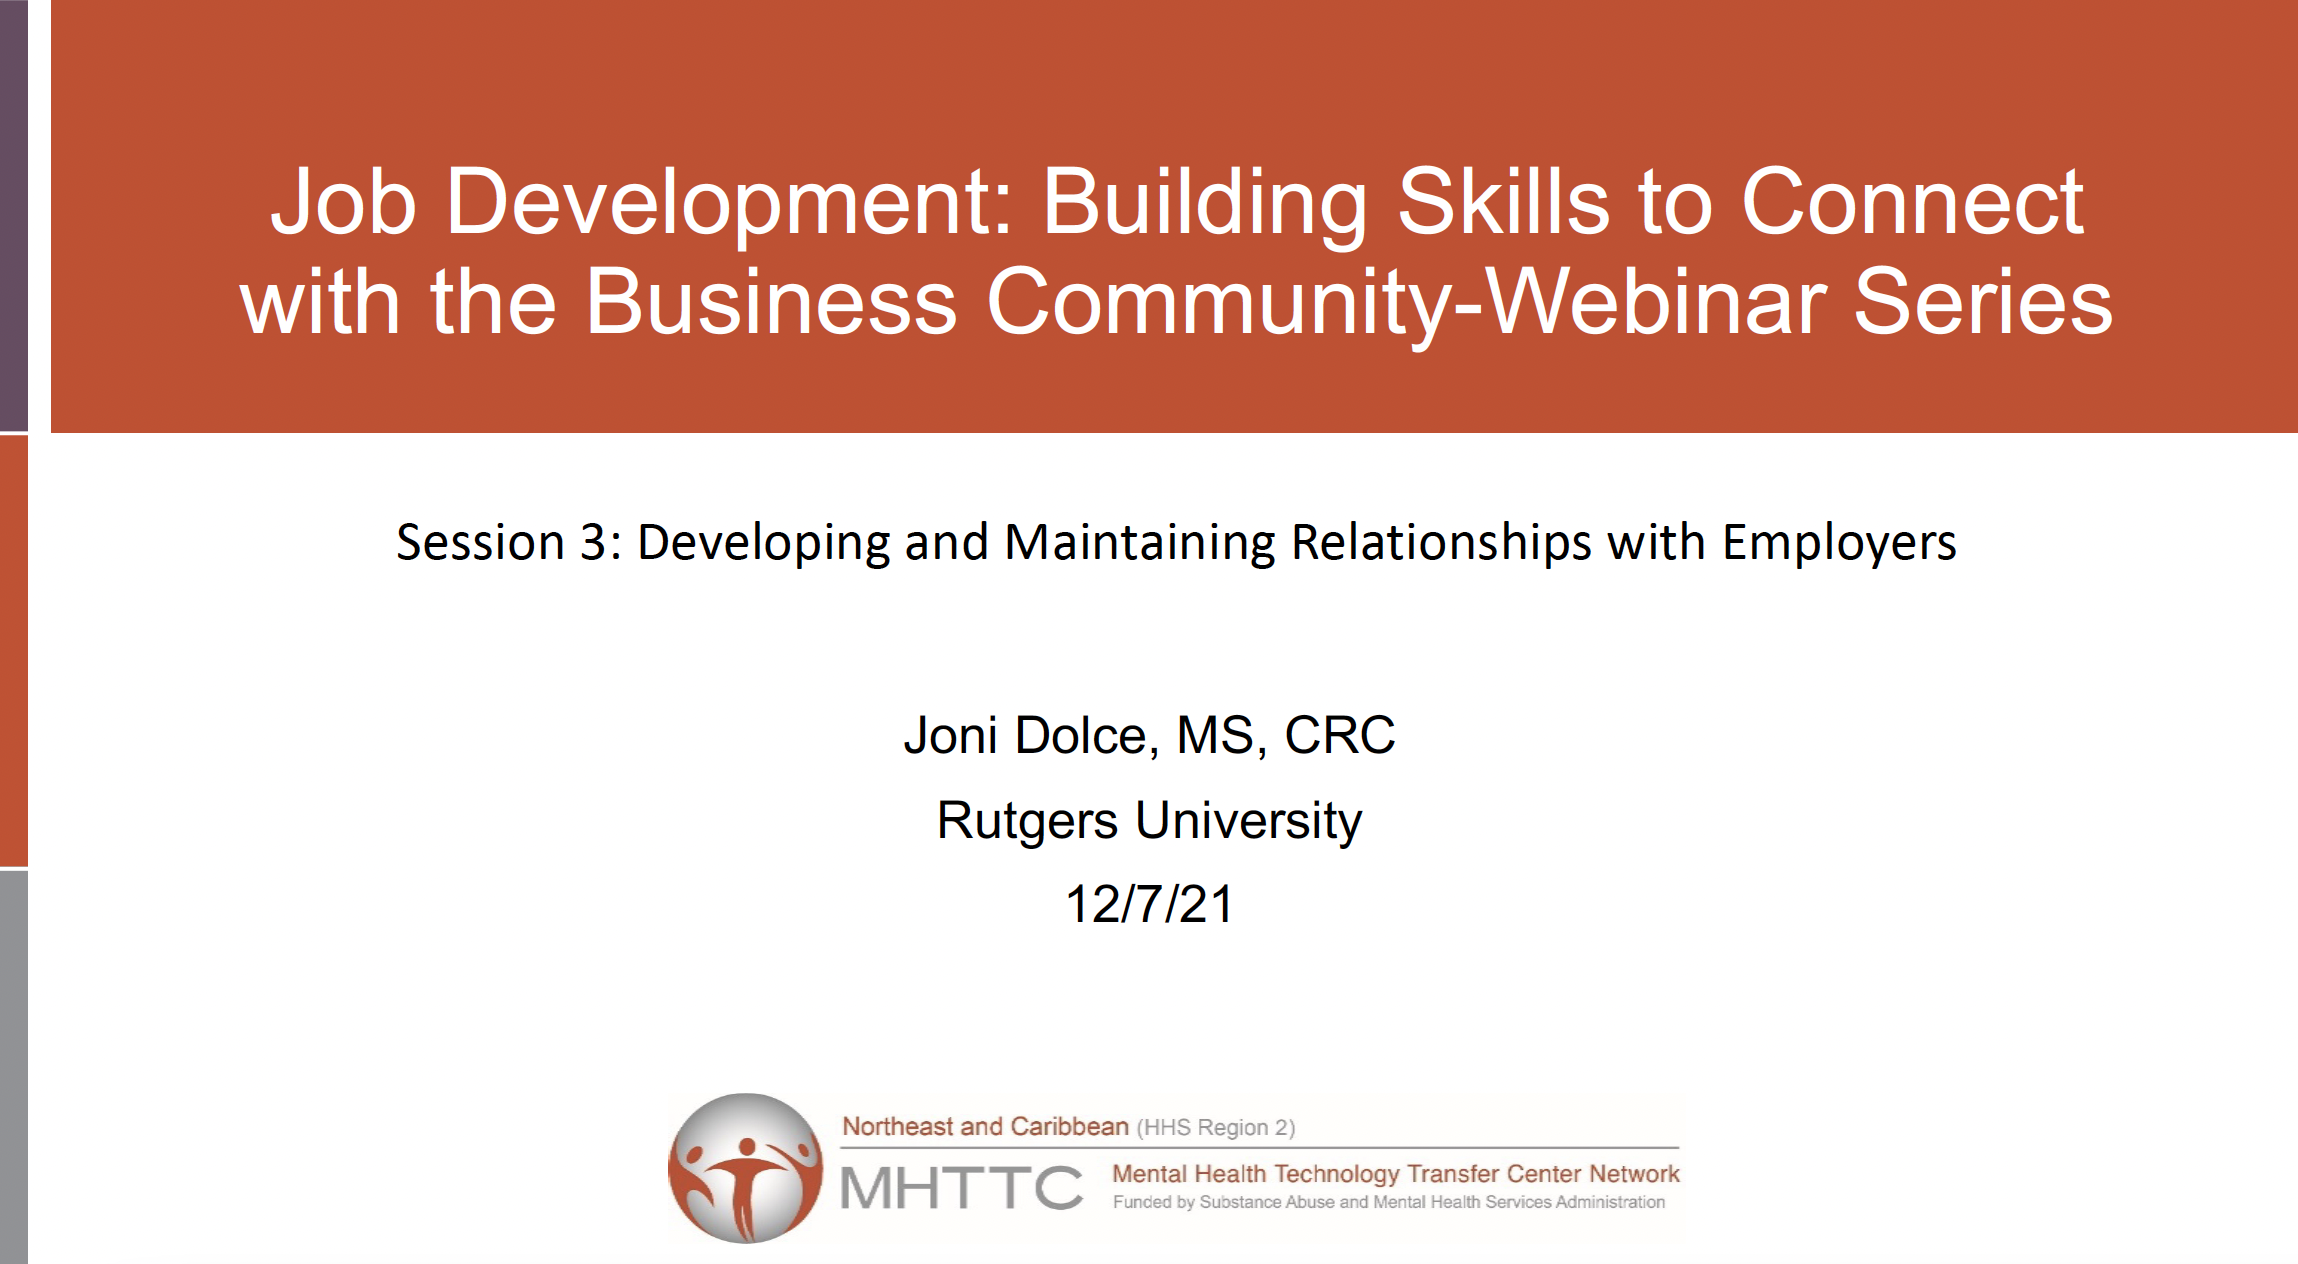 Job Development: Building Skills to Connect with the Business Community, Session 3: Developing and Maintaining Relationships with Employers